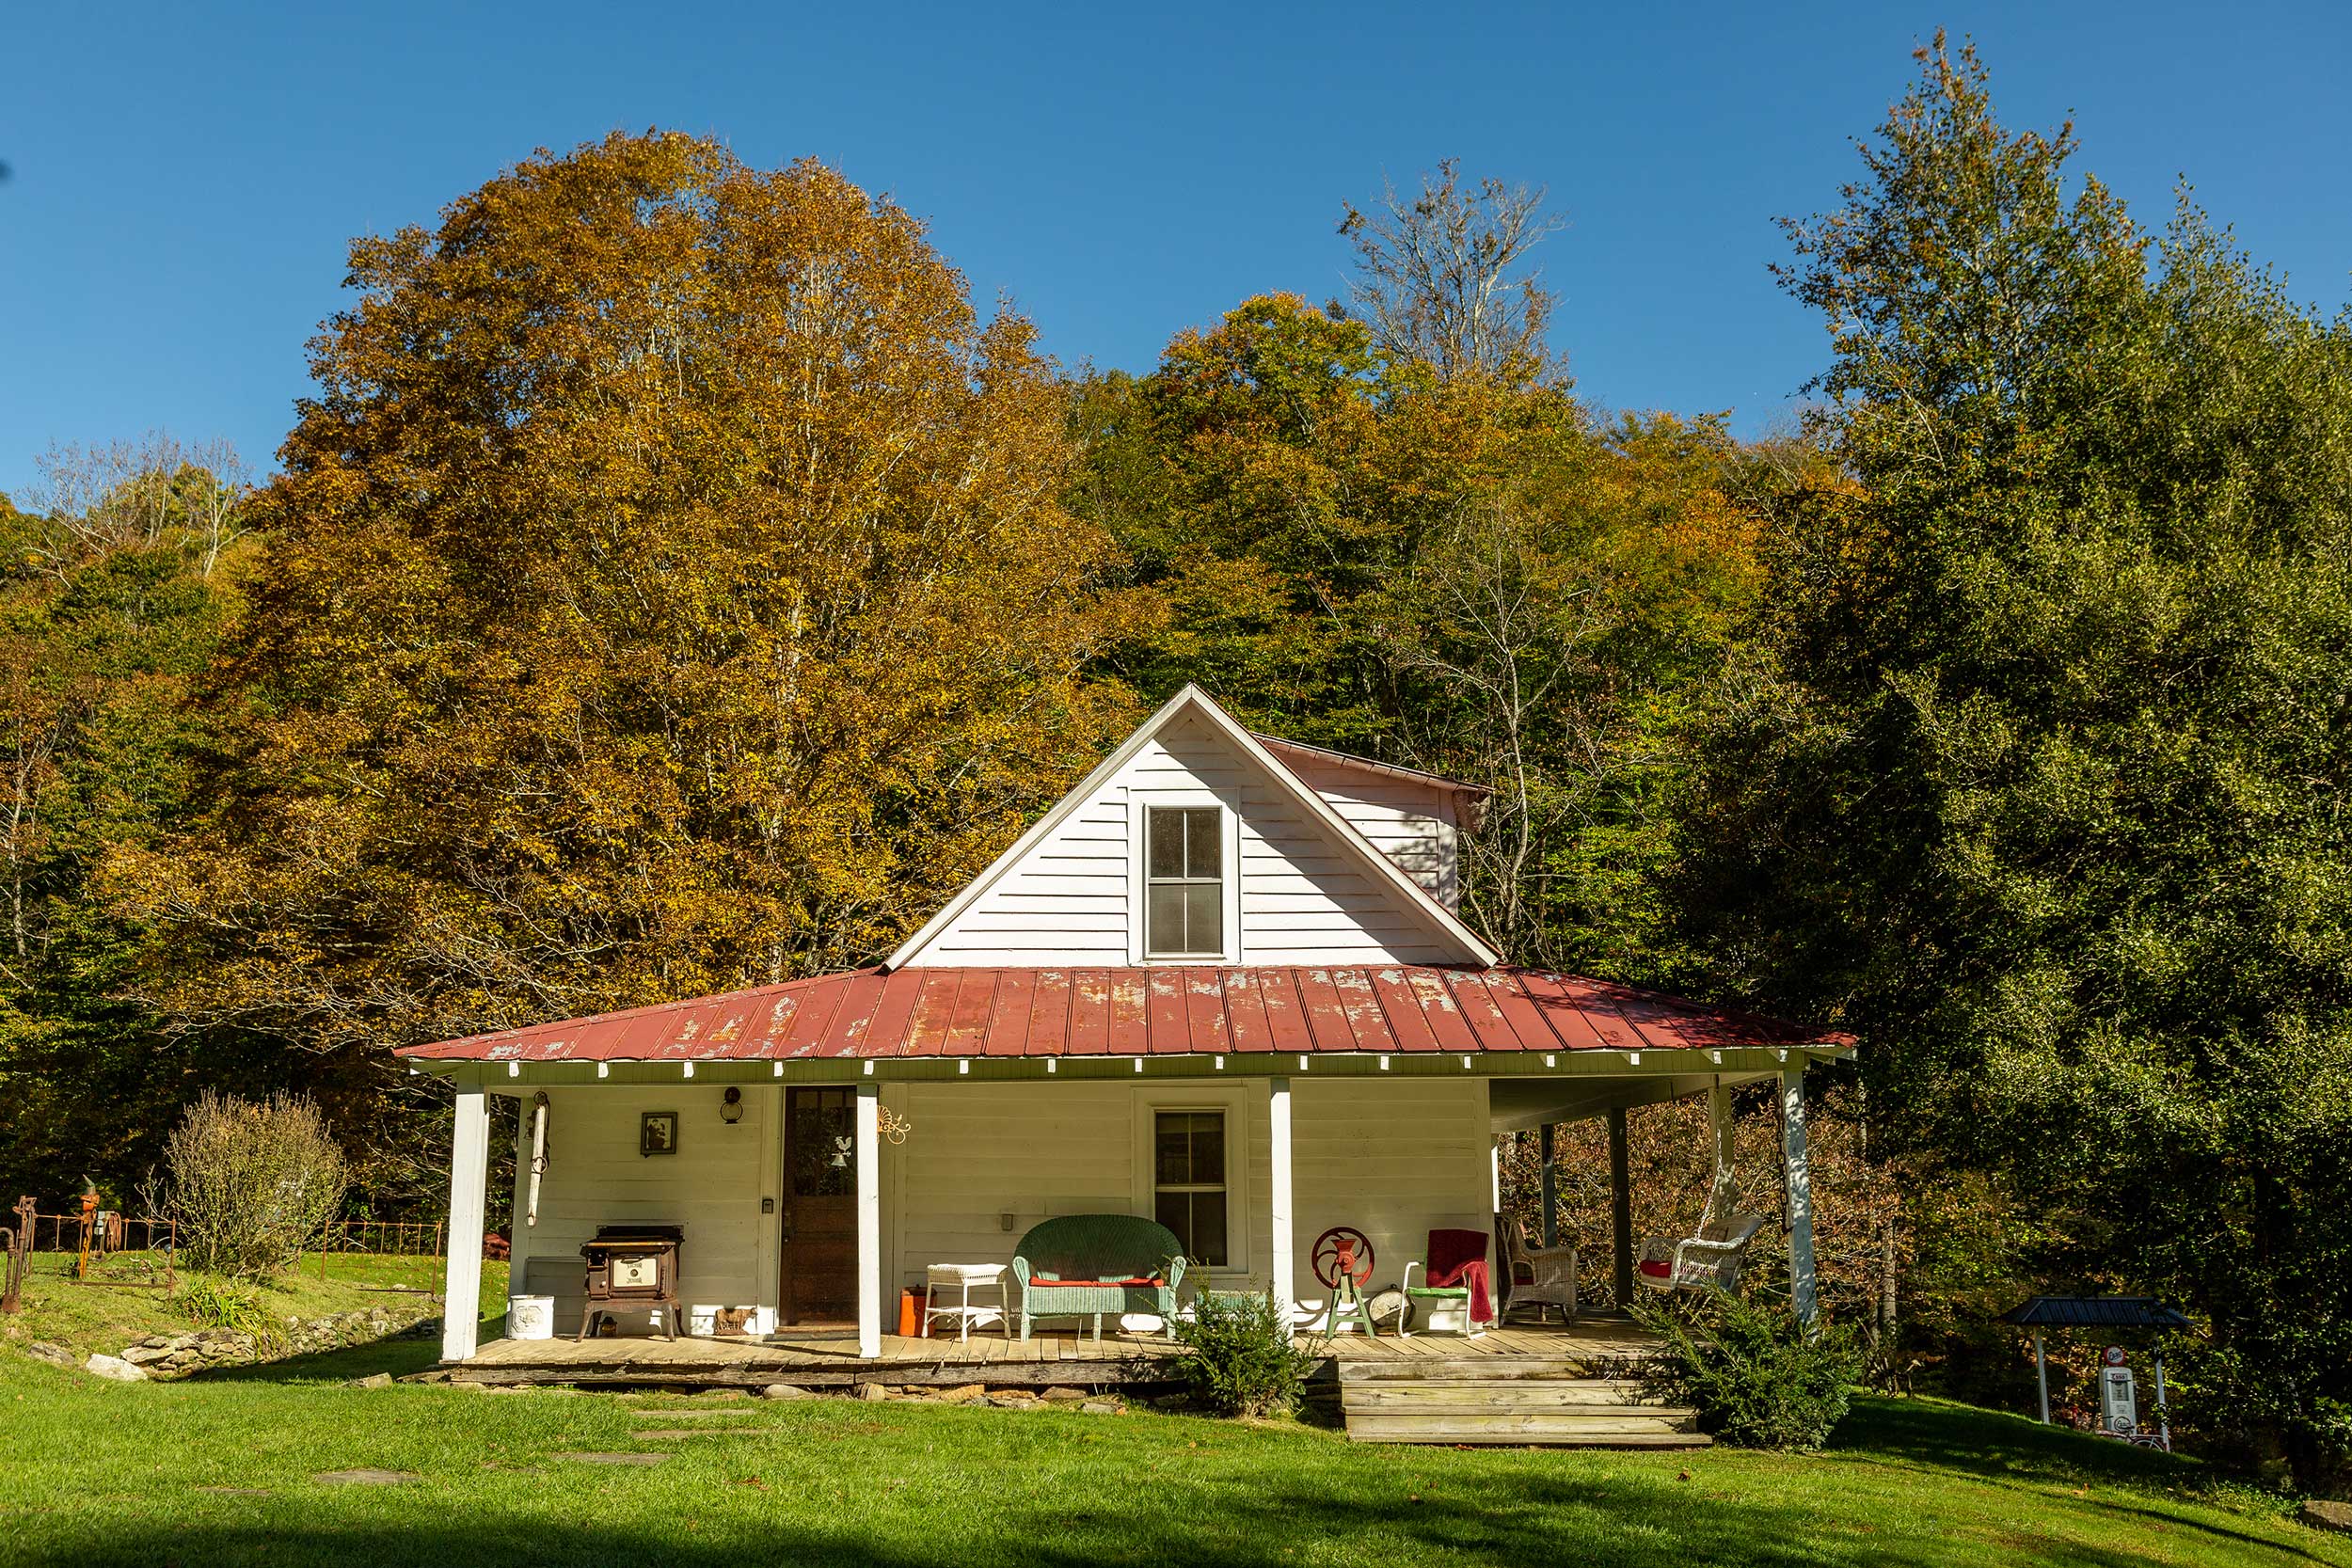 White Fence Farm Vacation Rentals